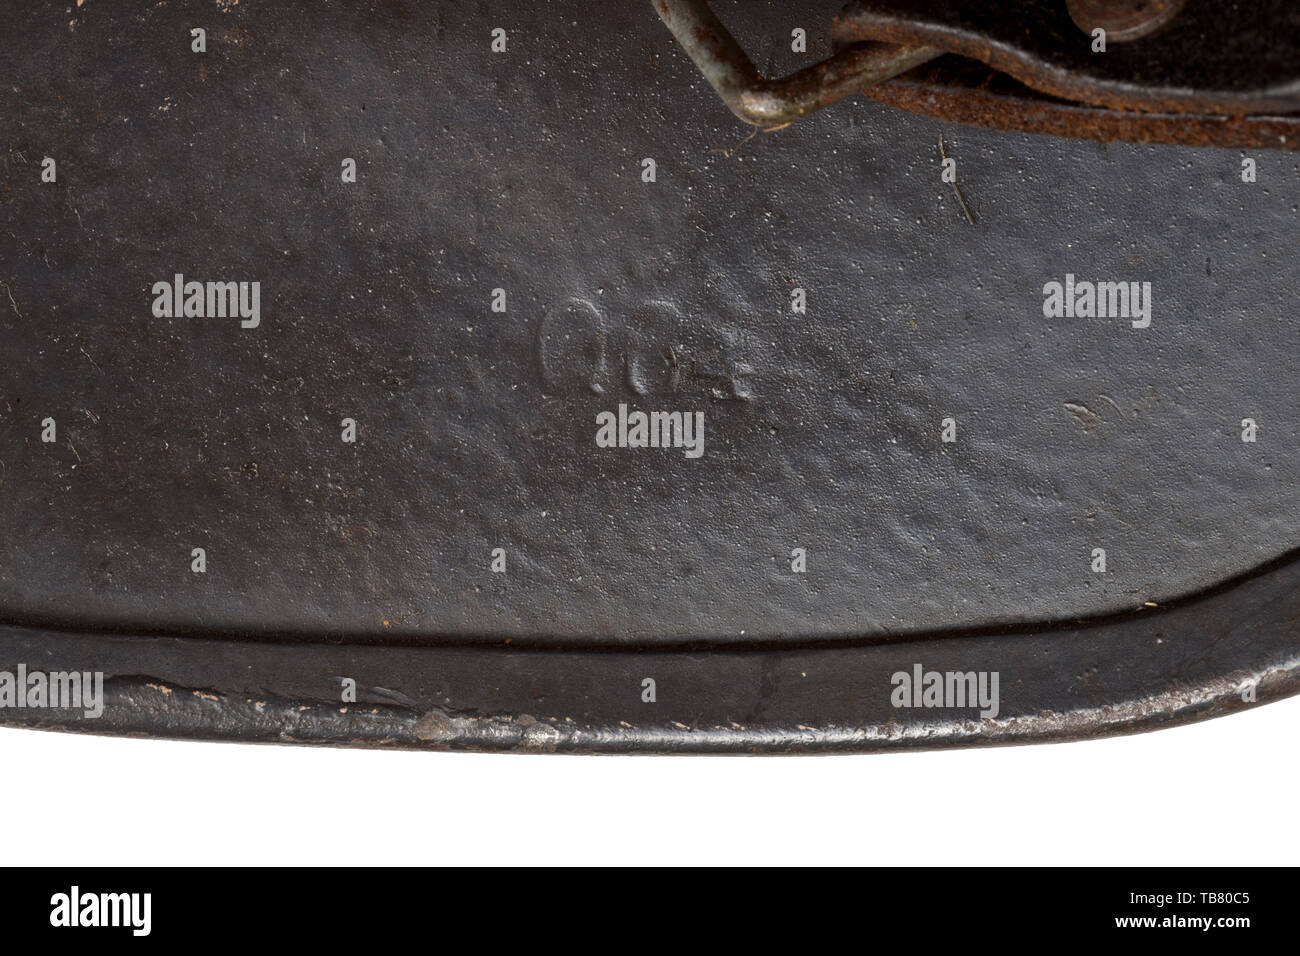 Body armour, helmets, German steel helmet M40, introduced 1940, Luftwaffe (Air Force) pattern, detail, Editorial-Use-Only Stock Photo